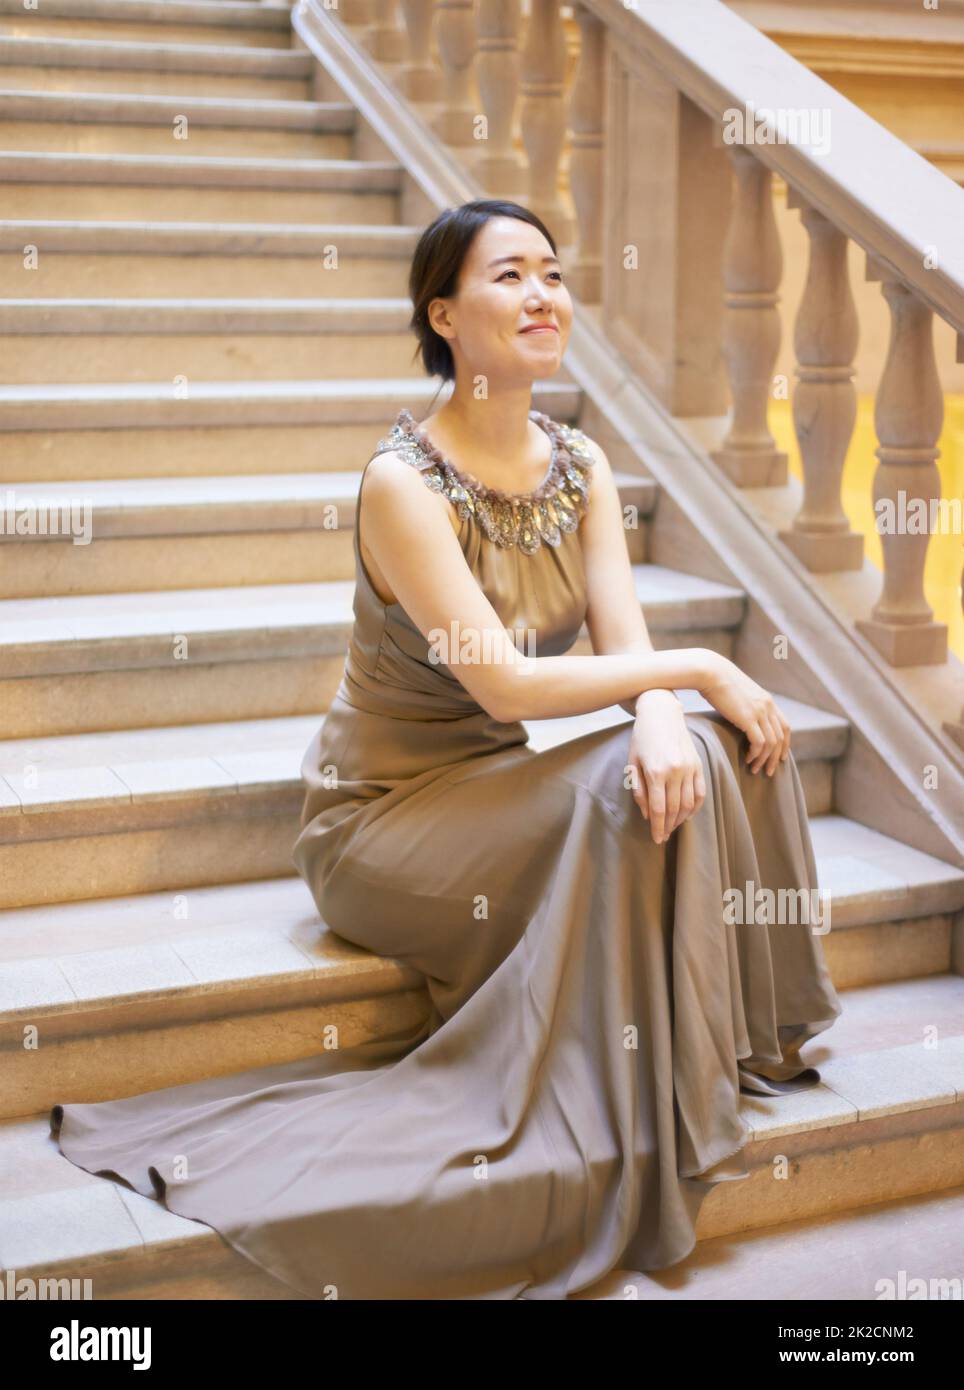 Perfect elegance. Shot of an elegantly dressed young woman sitting on a staircase. Stock Photo